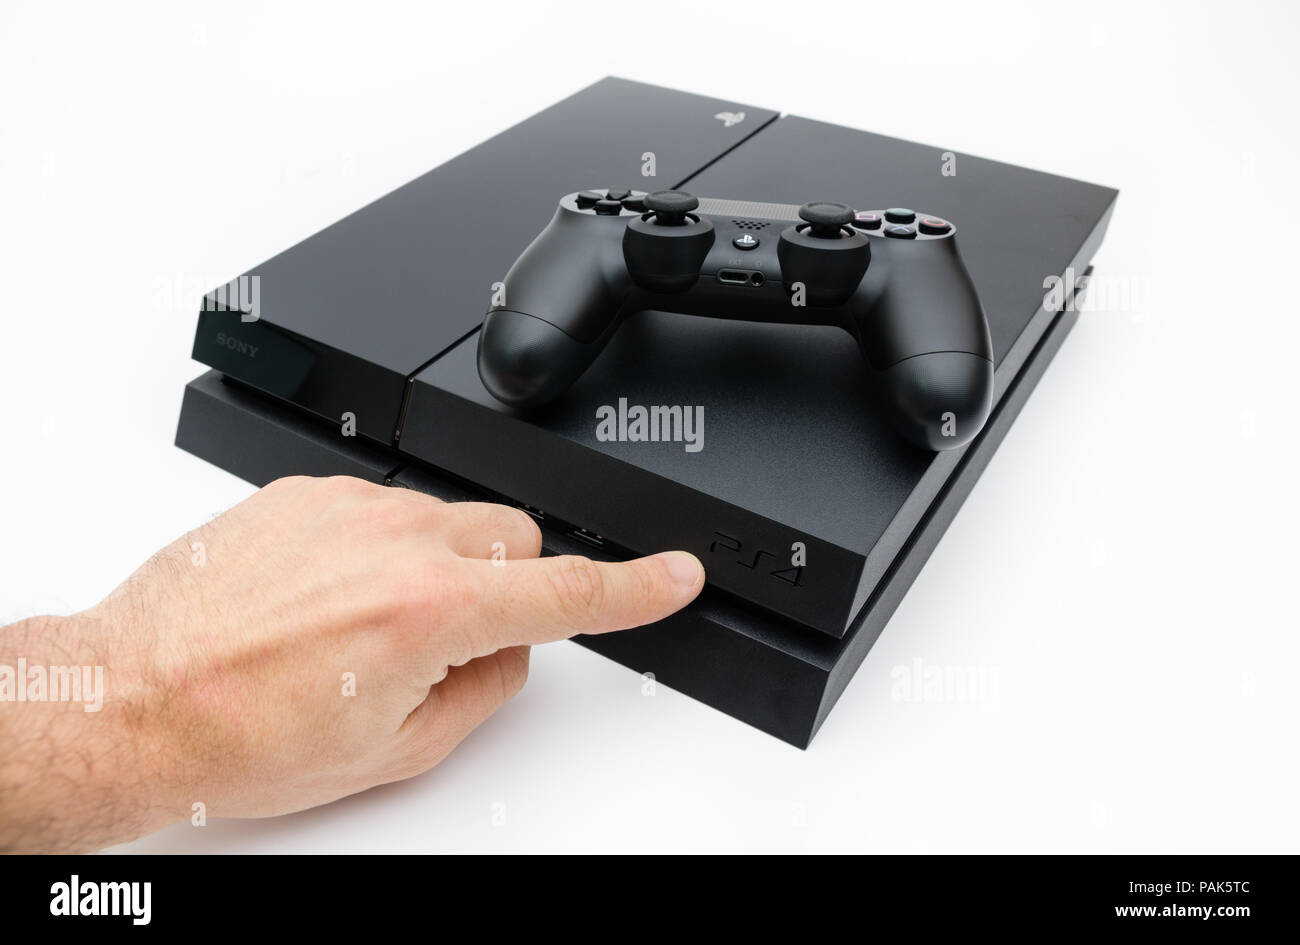 CLUJ-NAPOCA, ROMANIA - 25 FEBRUARY: Illustrative editorial image of Sony  Playstation 4 console with Dualshock 4 controller and a hand showing the  PS$ Stock Photo - Alamy